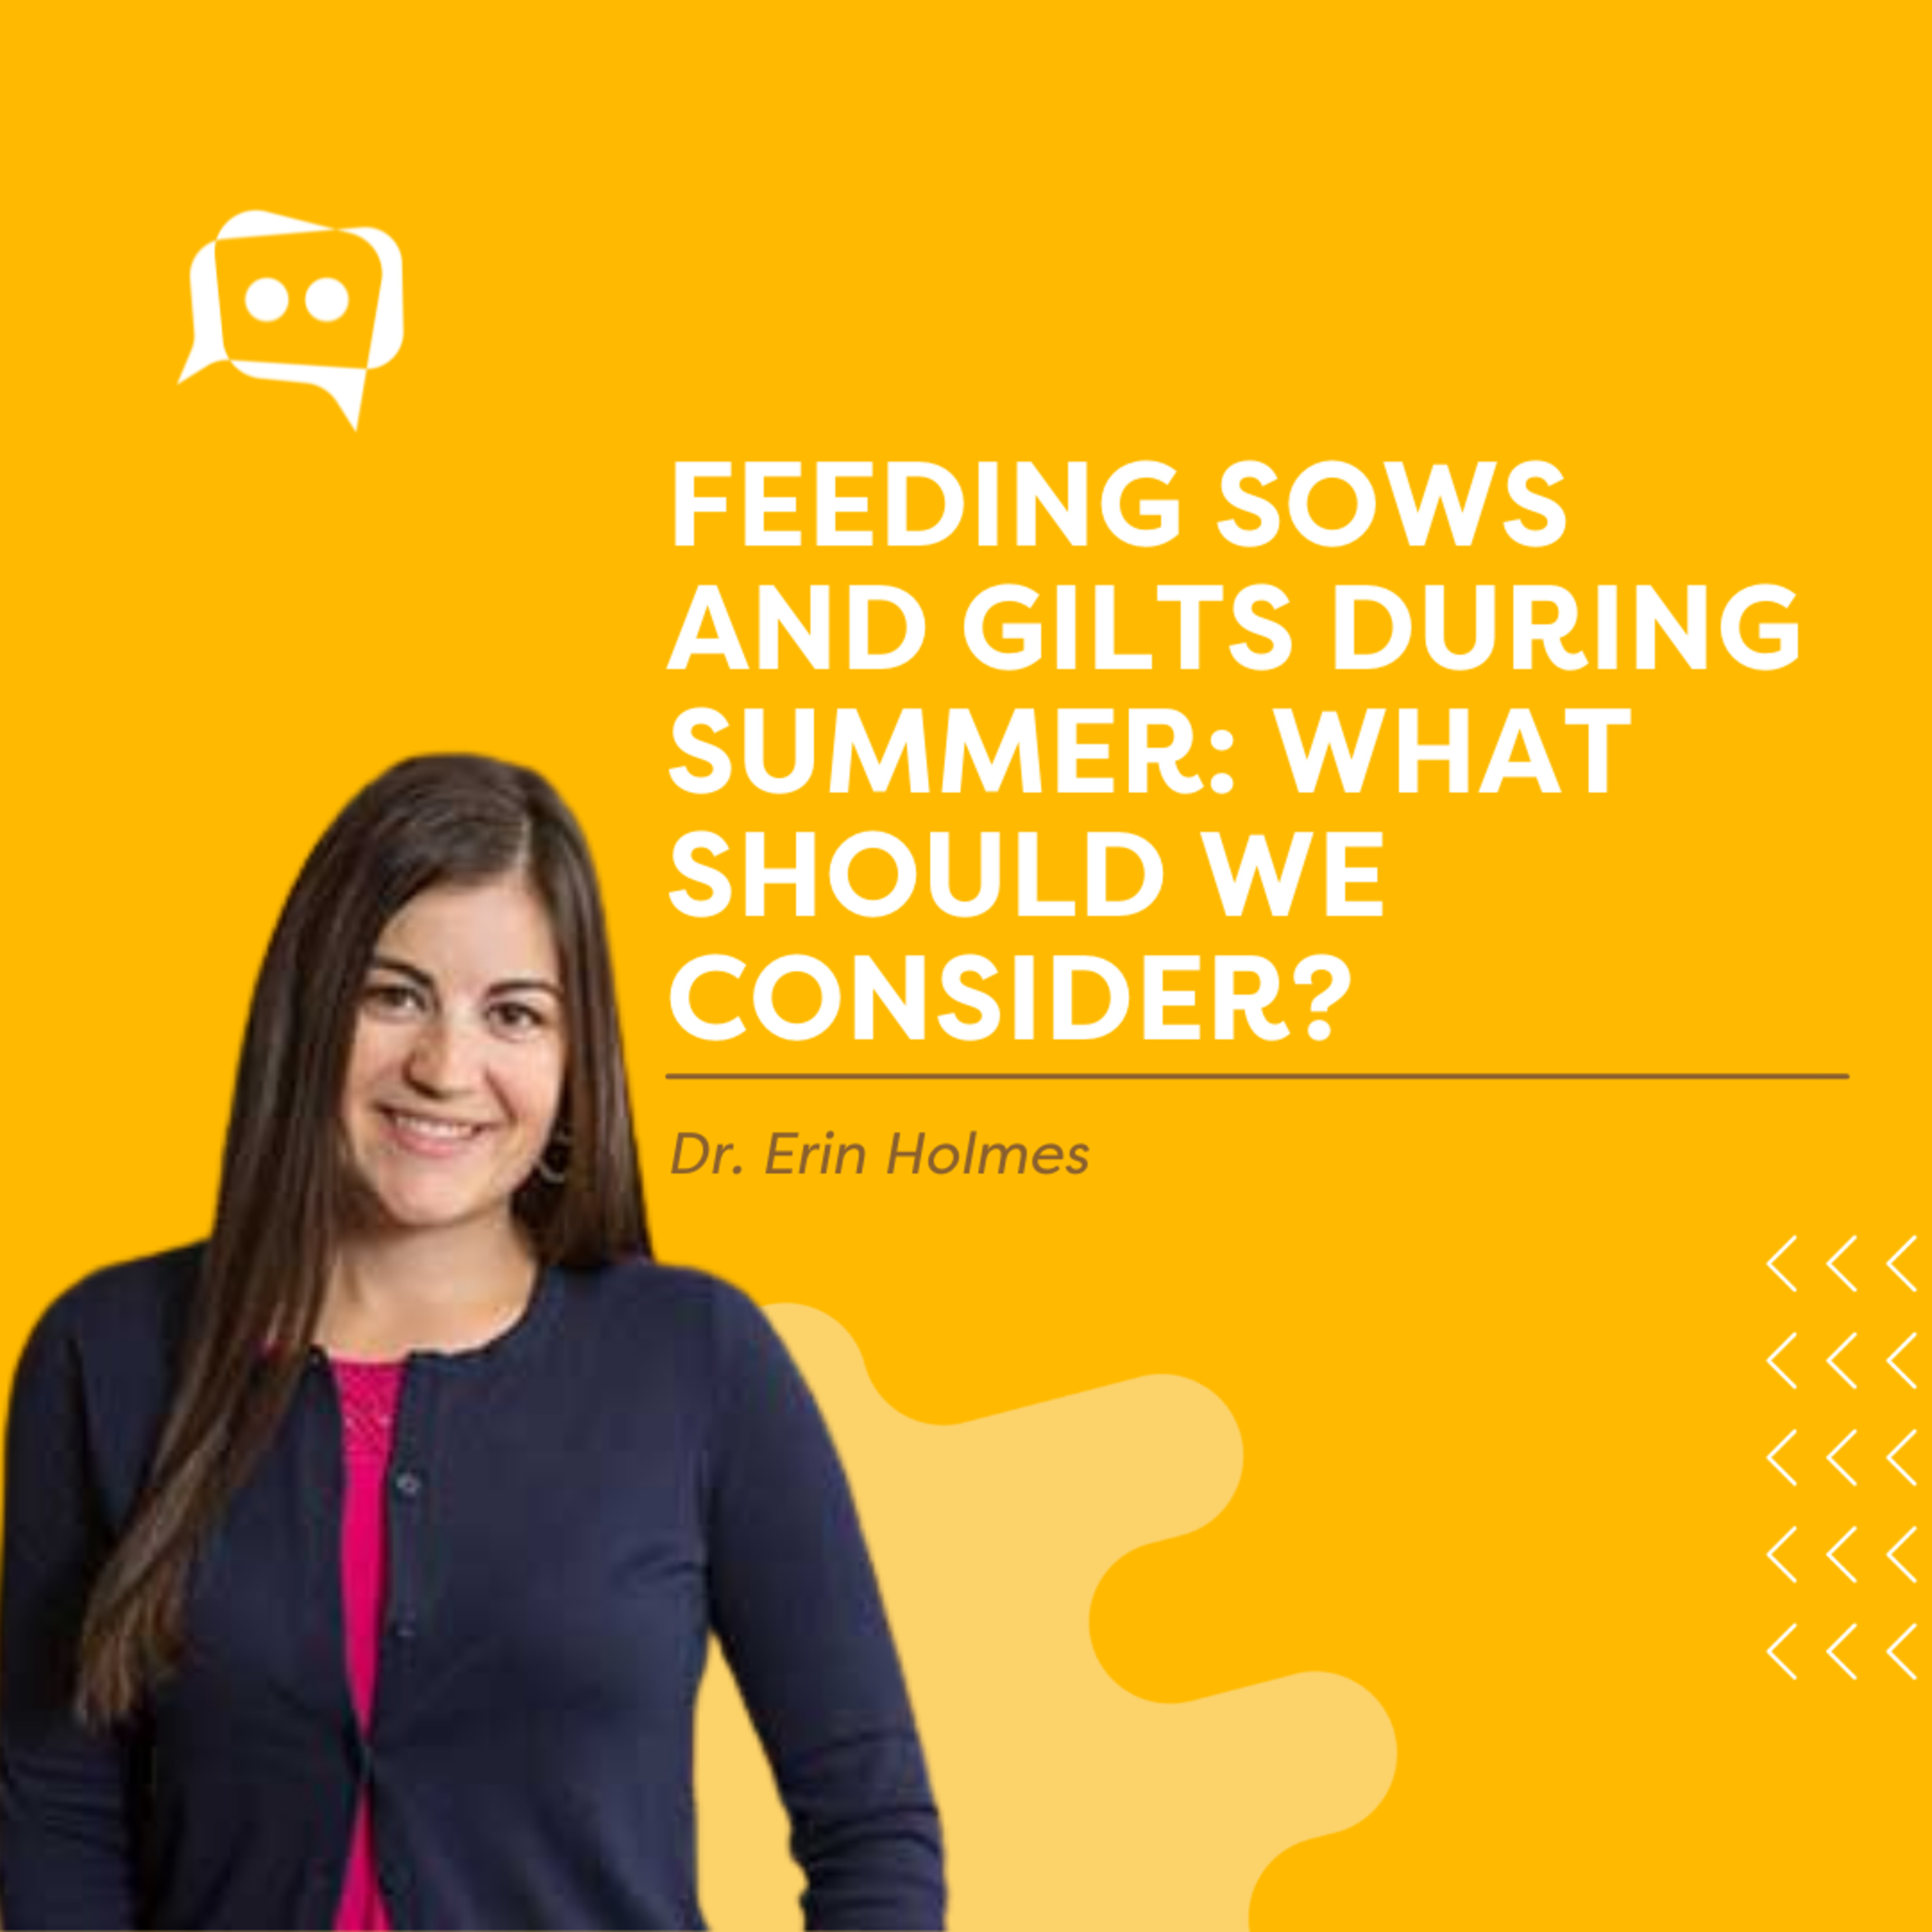 #SHORTS: Feeding sows and gilts during summer: what should we consider?